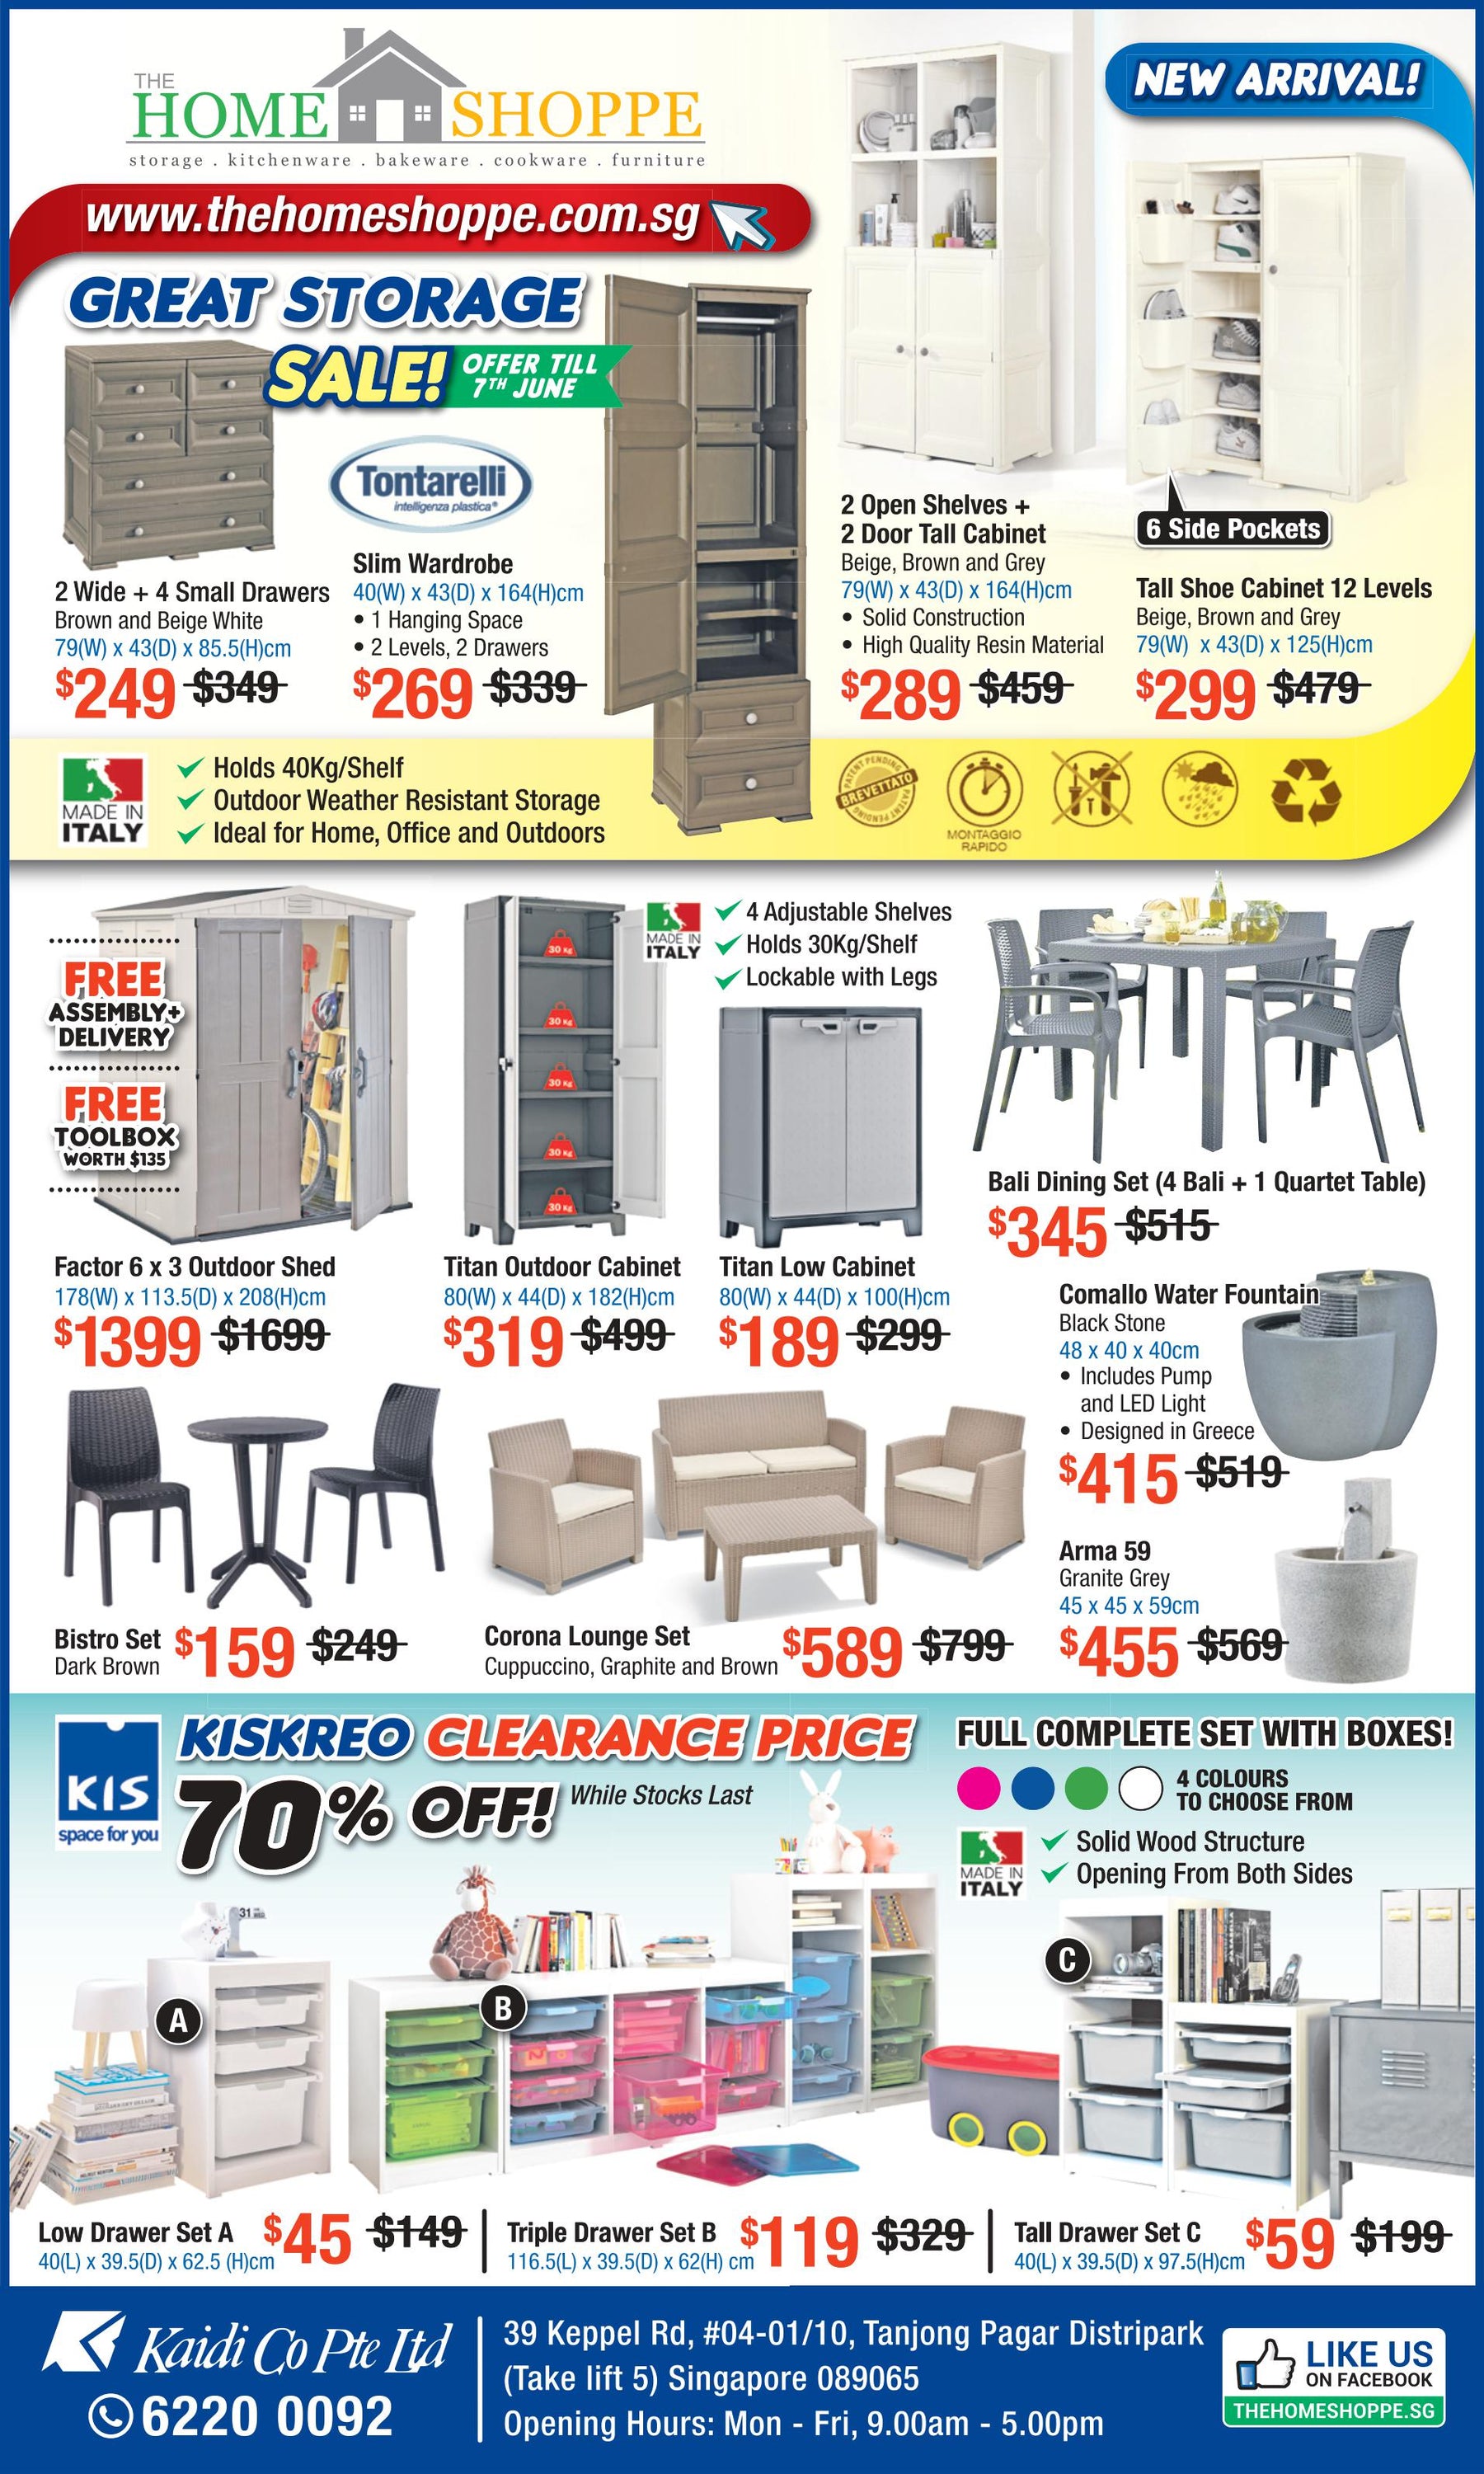 GSS Great Storage Sale May - June 4th 2019